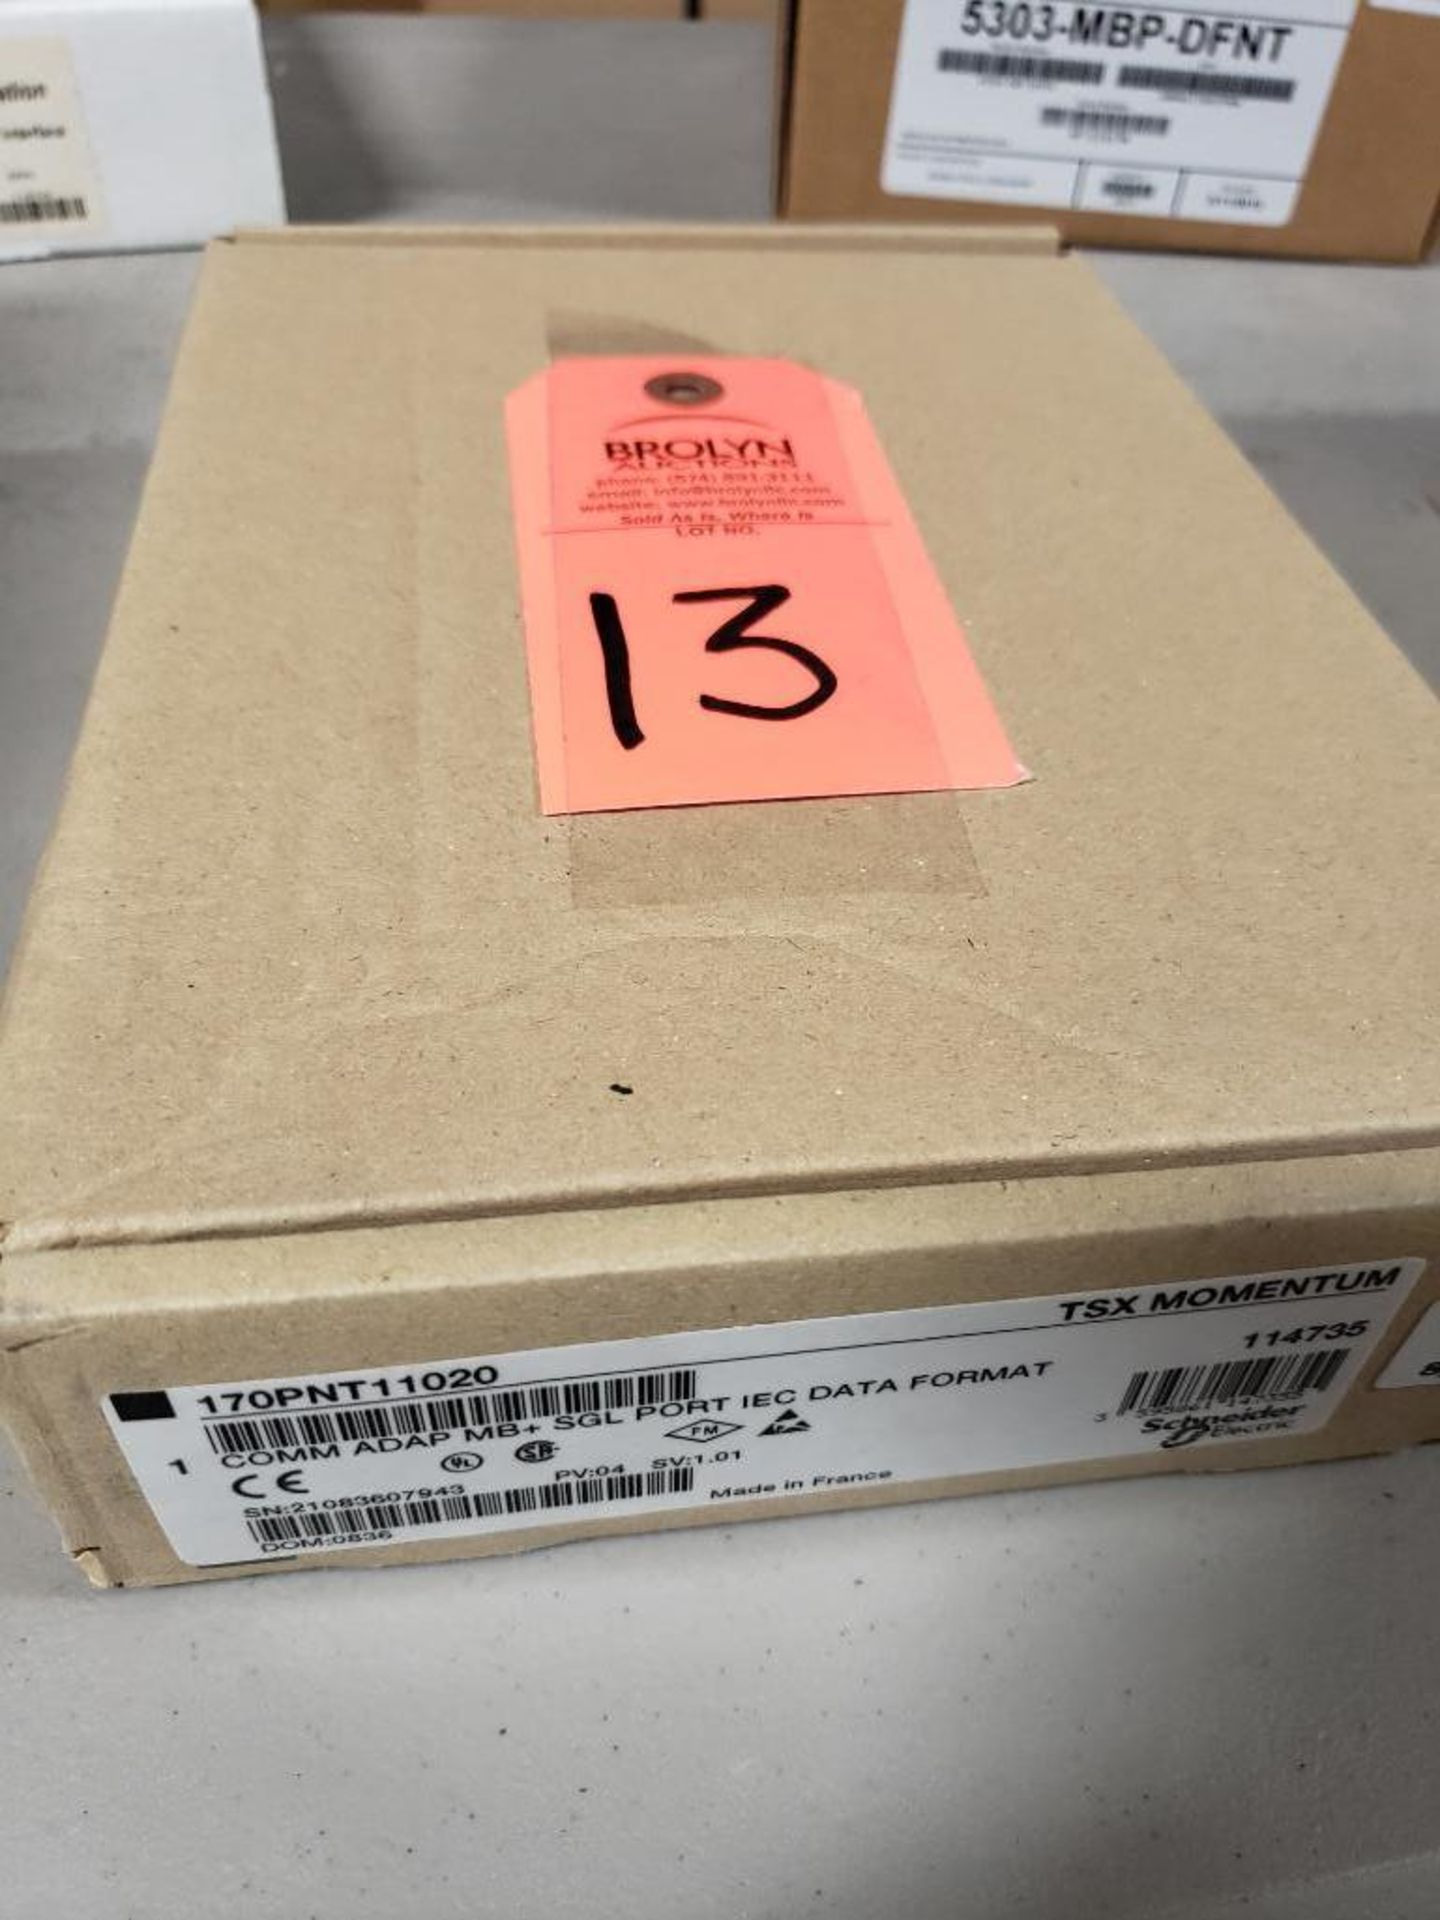 Qty 1 - Schneider Modicon Model 170PNT11020. New in sealed box as pictured.